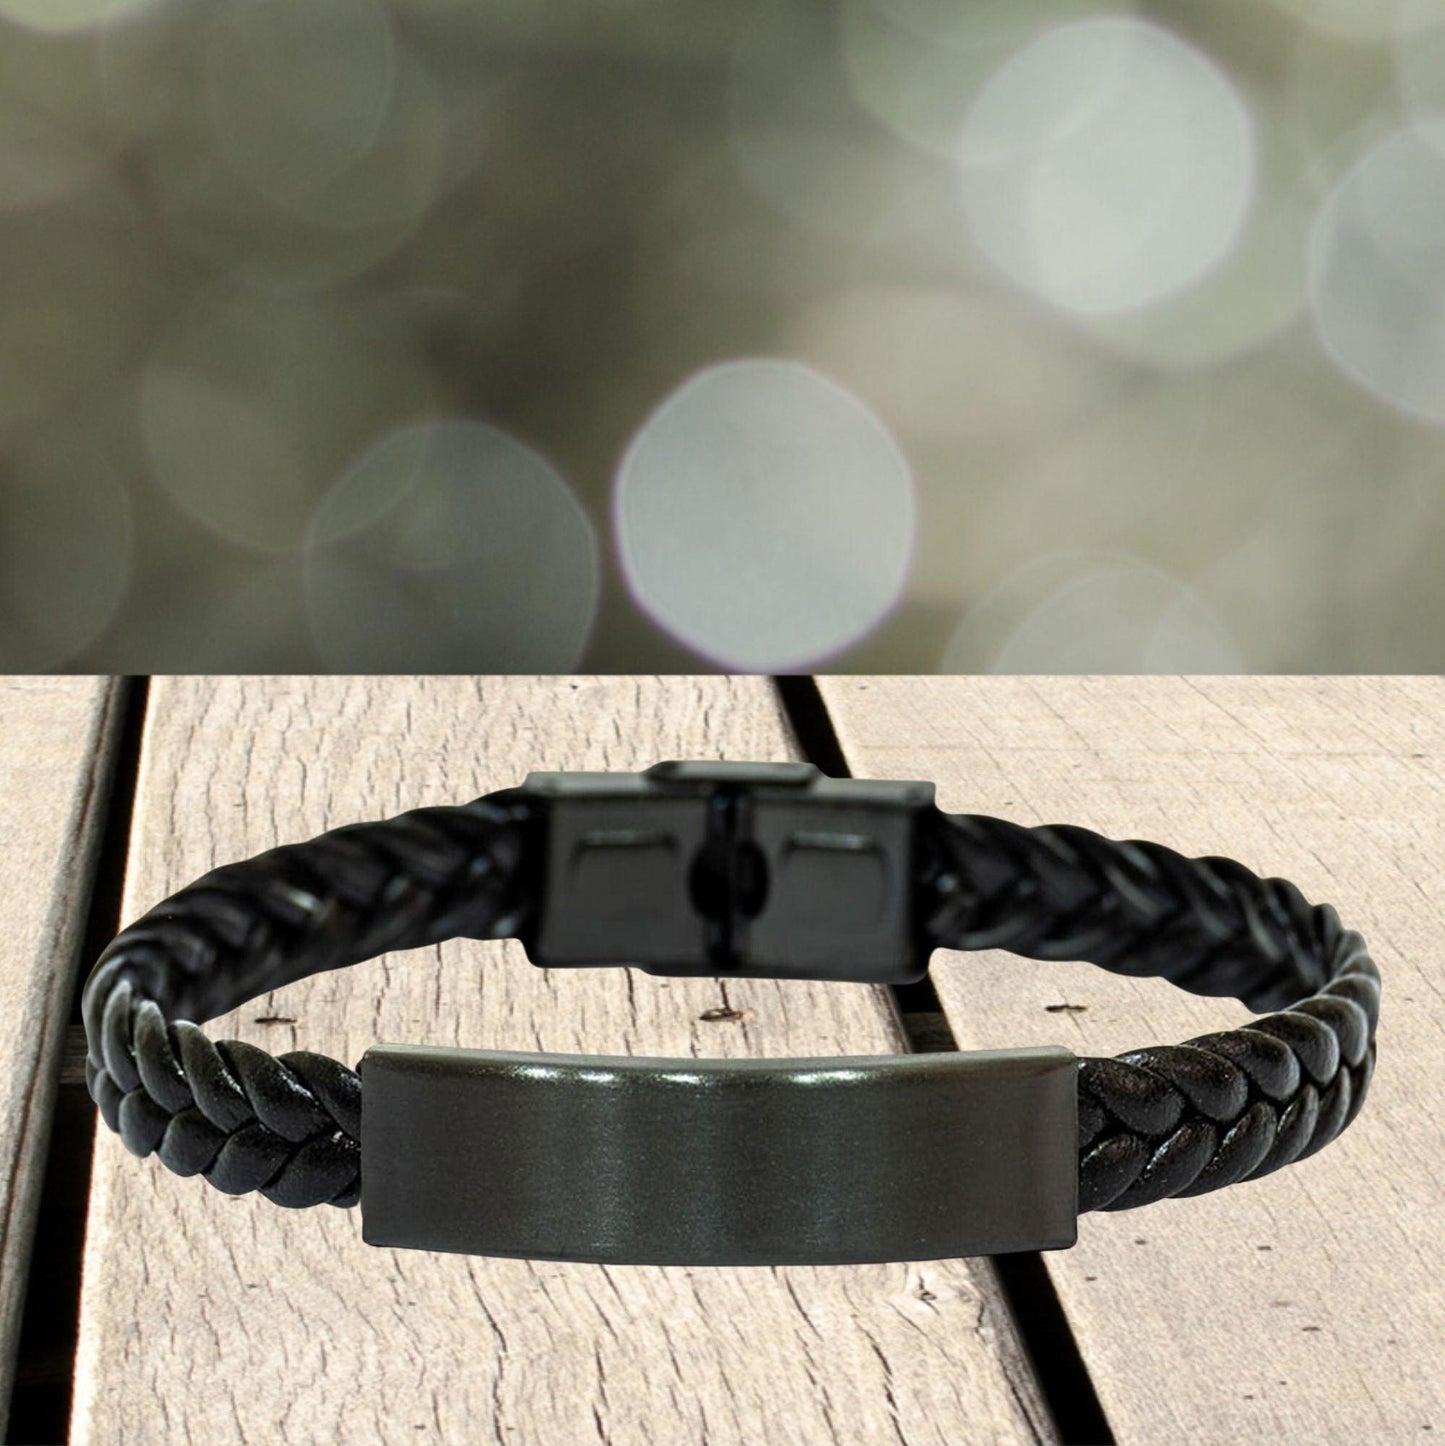 Bestie Christmas Perfect Gifts, Bestie Braided Leather Bracelet, Motivational Bestie Engraved Gifts, Birthday Gifts For Bestie, To My Bestie Life is learning to dance in the rain, finding good in each day. I'm always with you - Mallard Moon Gift Shop